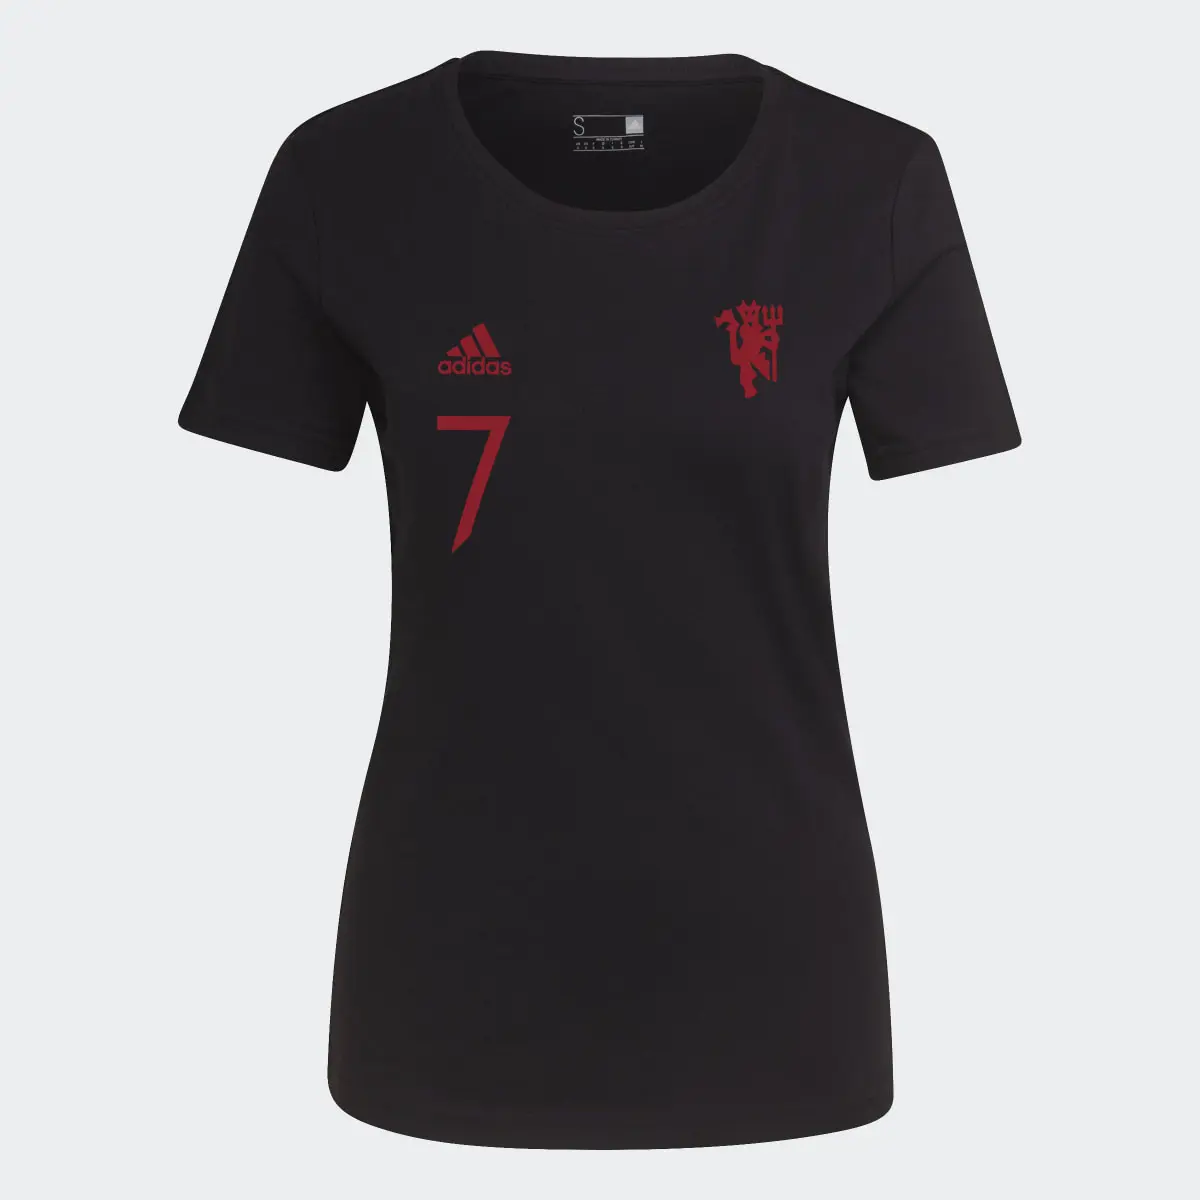 Adidas T-shirt Manchester United Graphic. 1